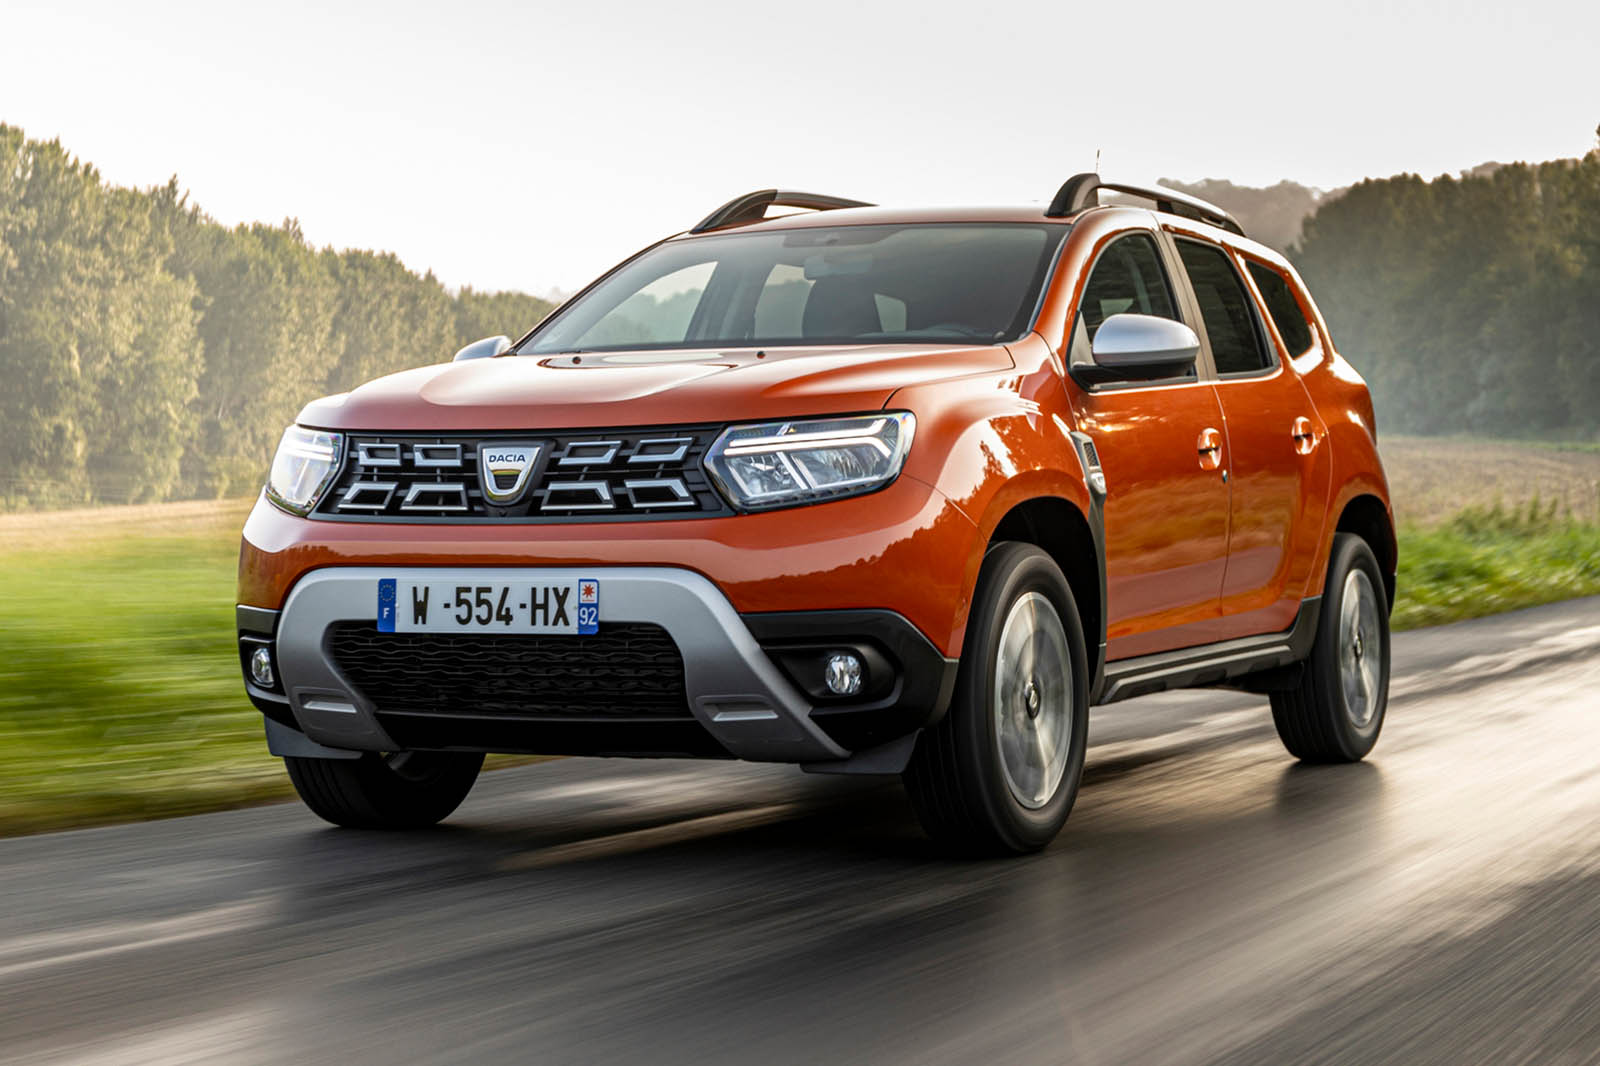 The New Dacia Duster Facelift